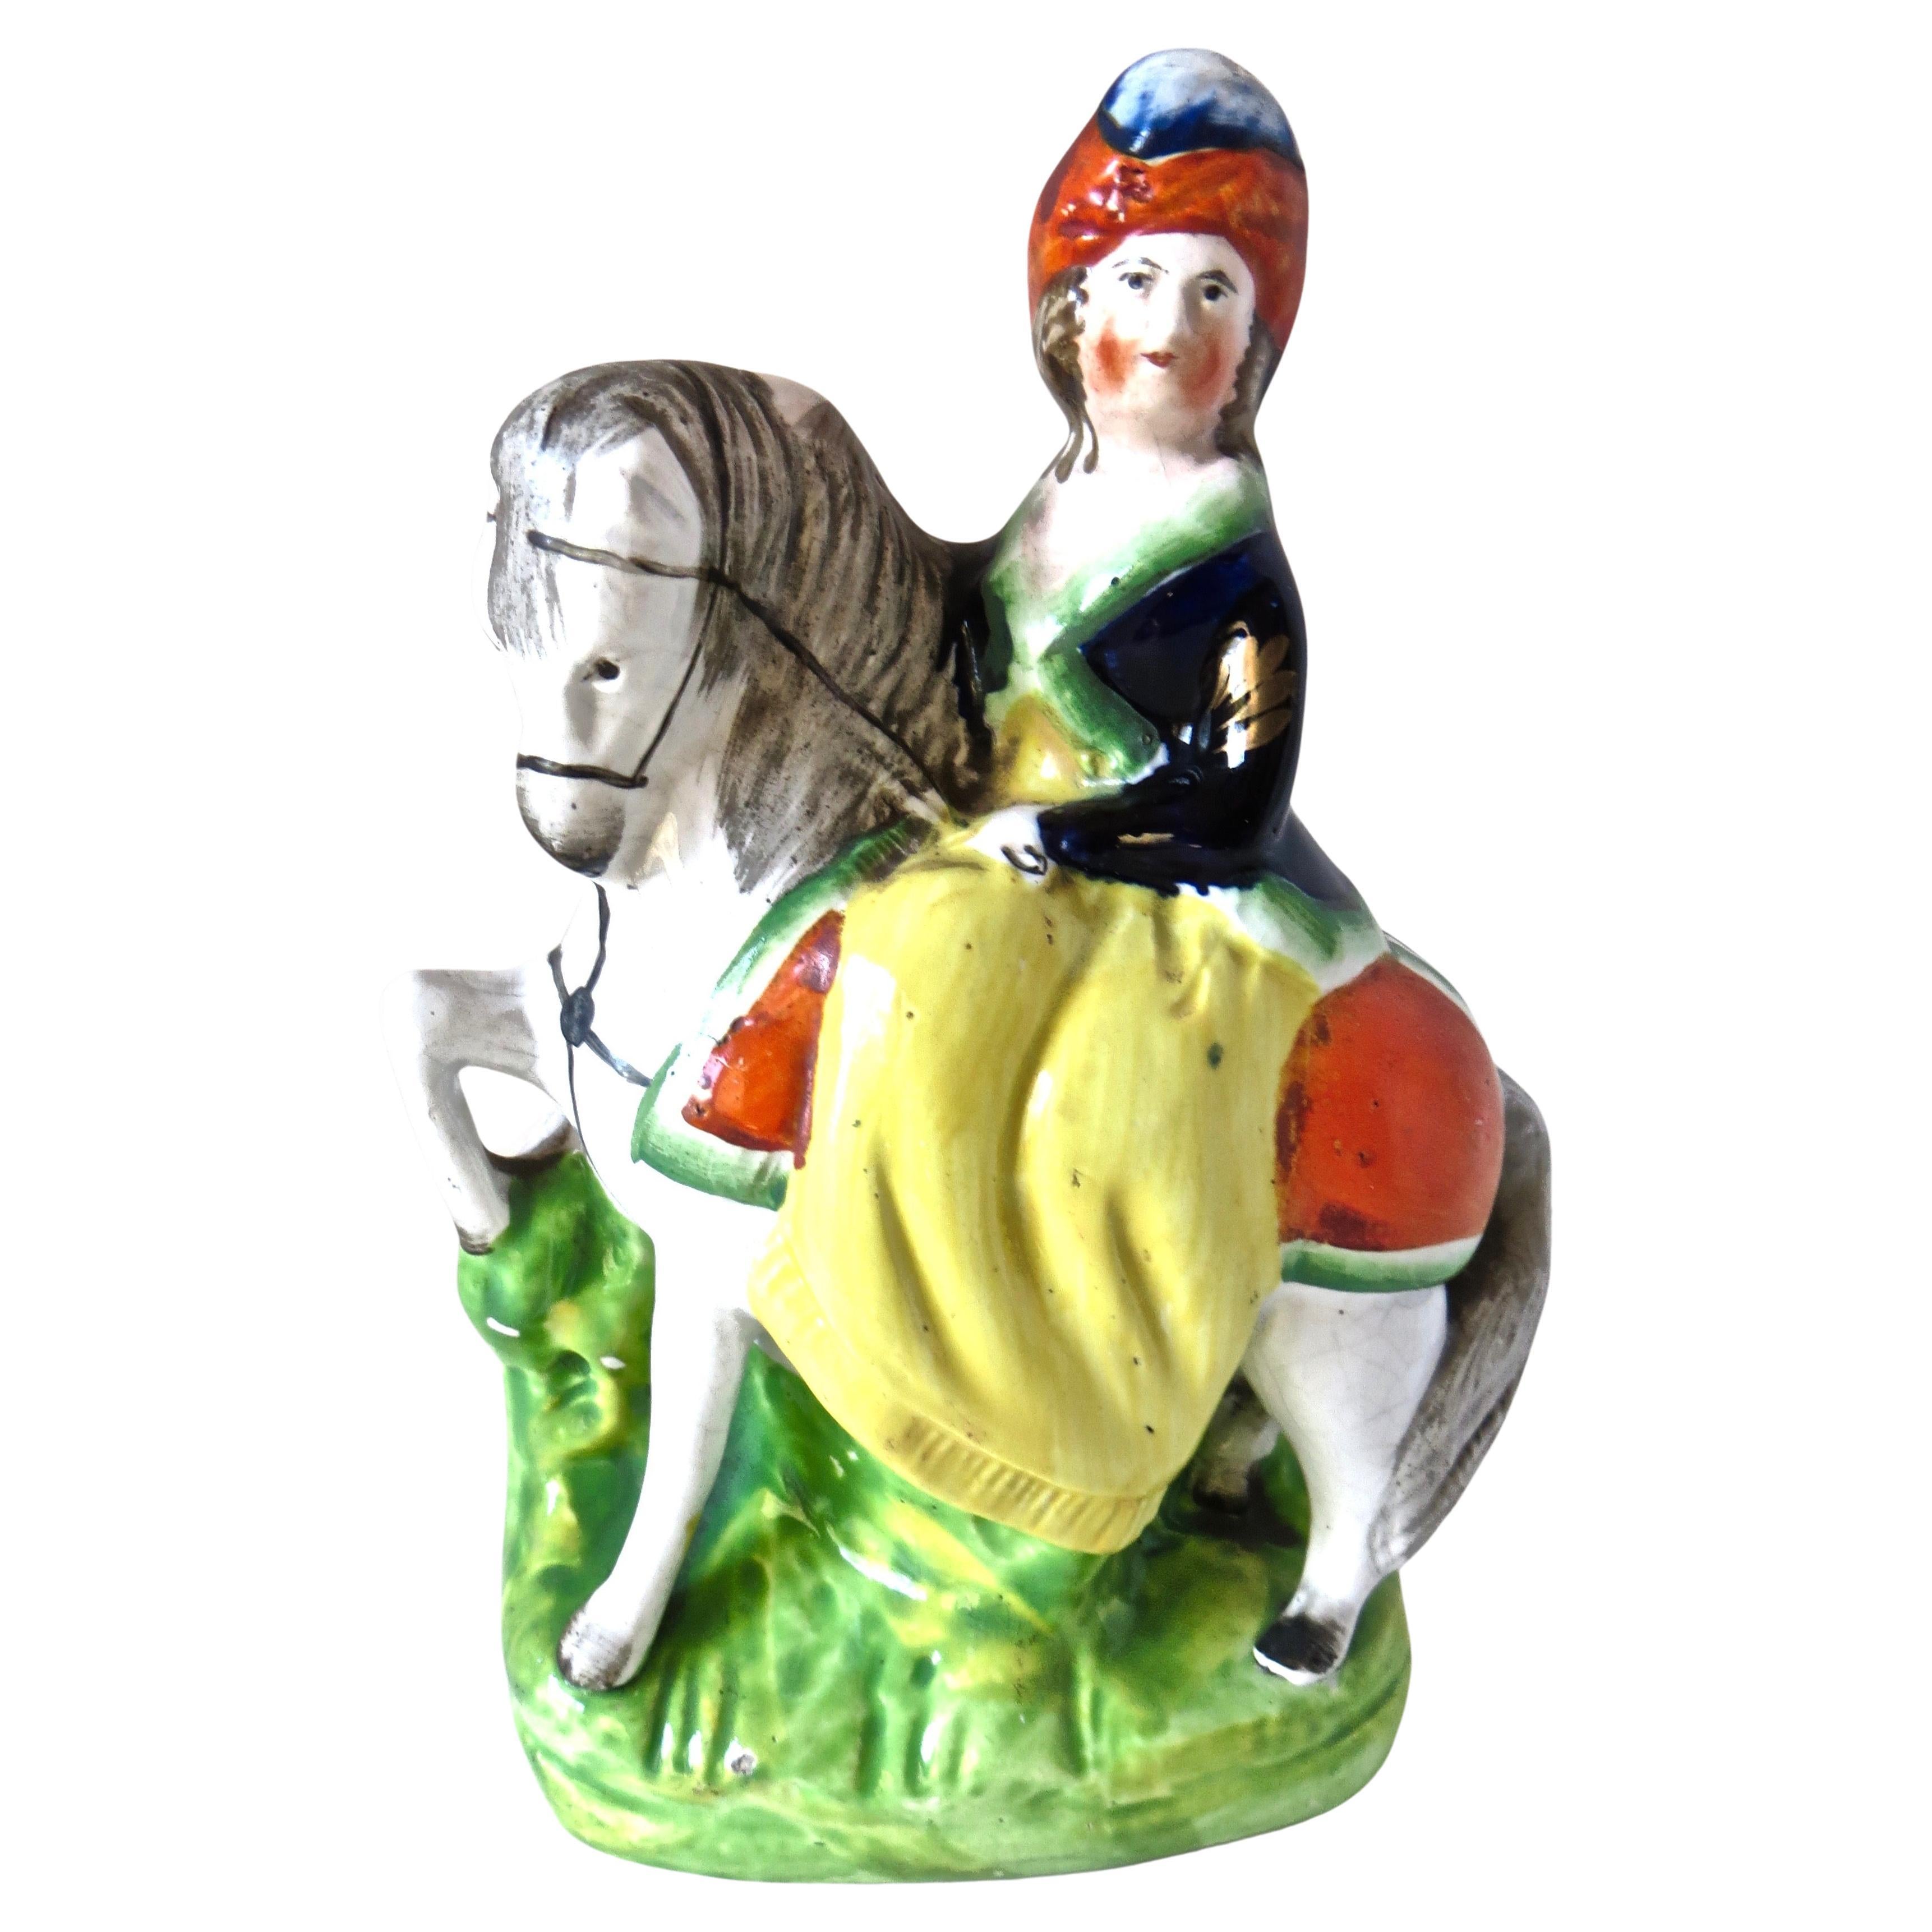 Staffordshire Figurine "Young Lady Side Saddle on Horse", circa 1885